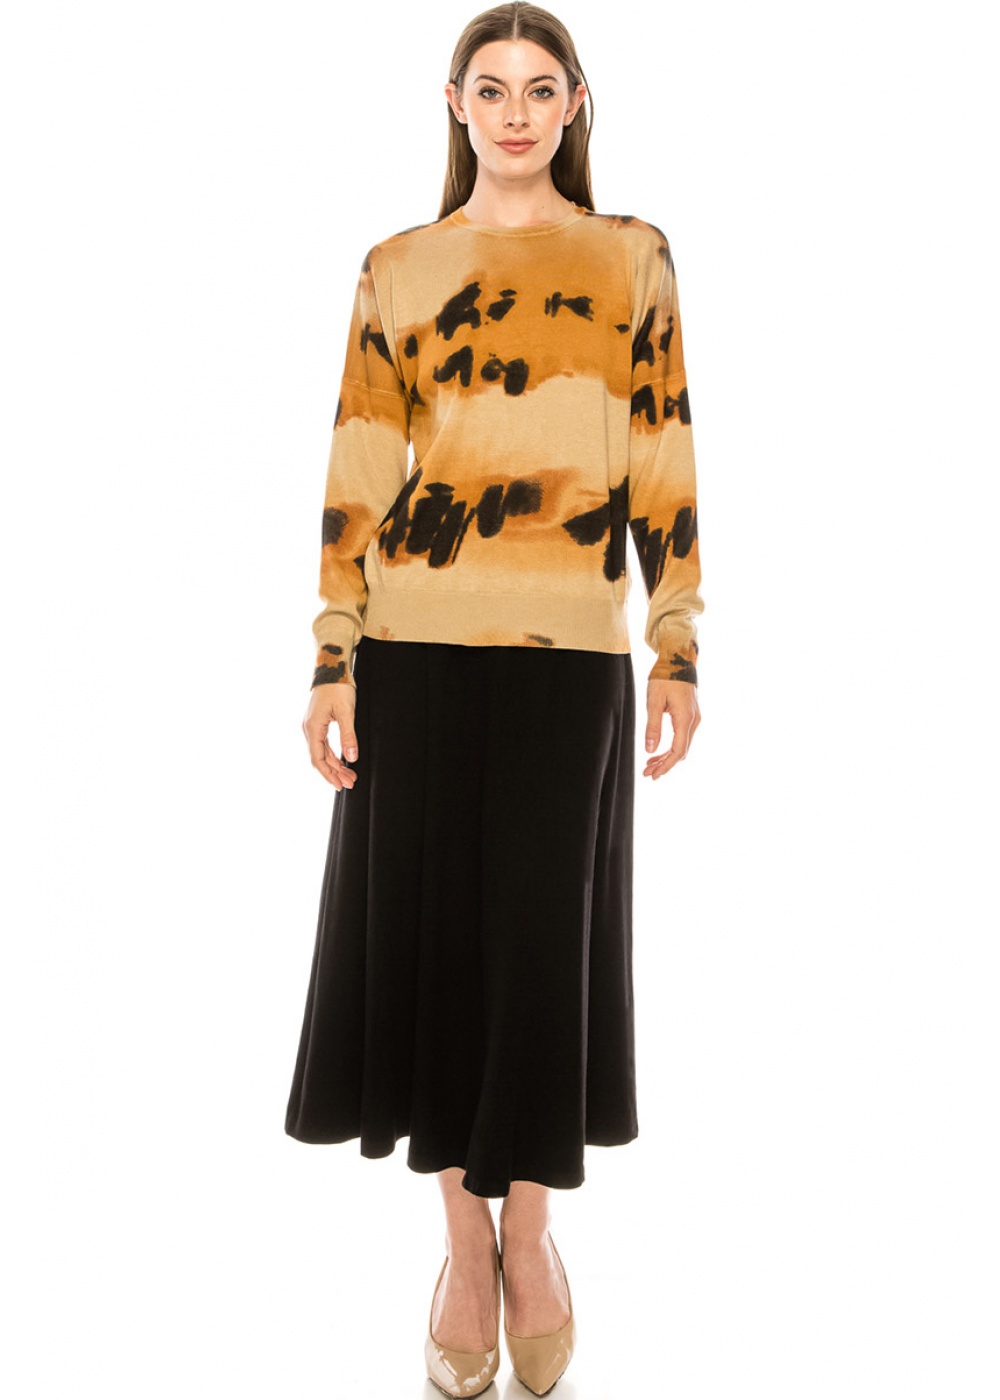 Abstract pattern sweater in camel